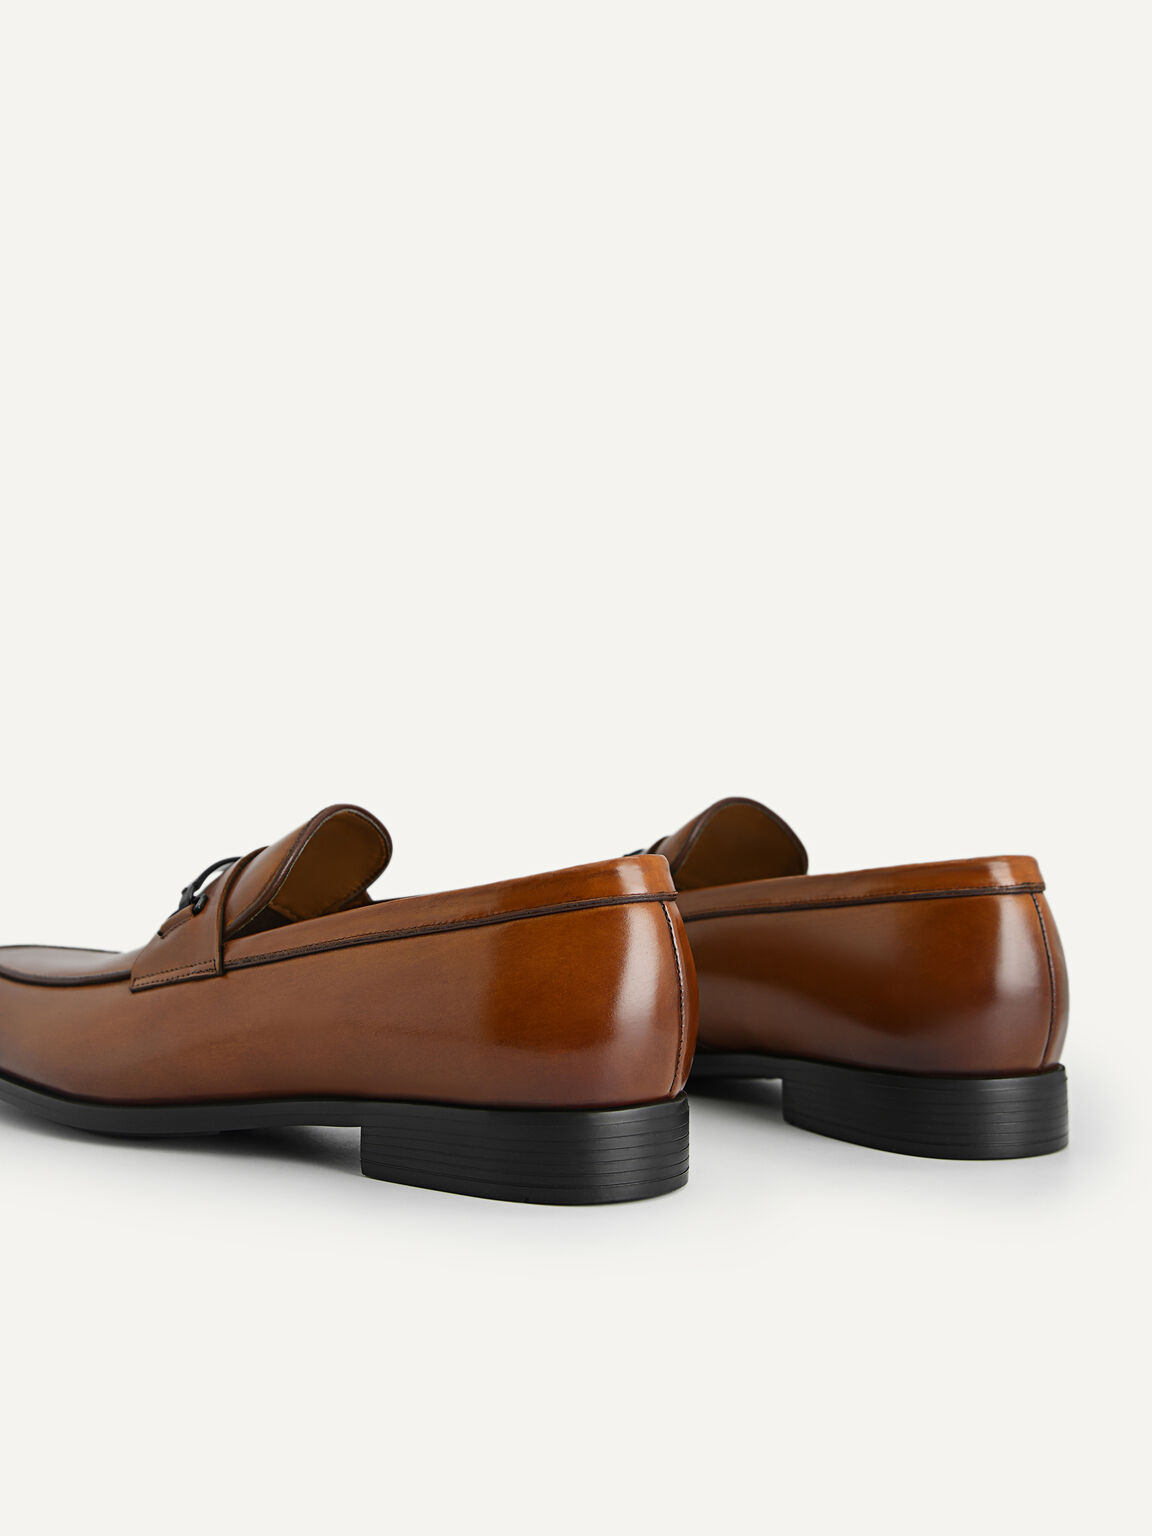 Altitude Leather Loafers, Camel, hi-res